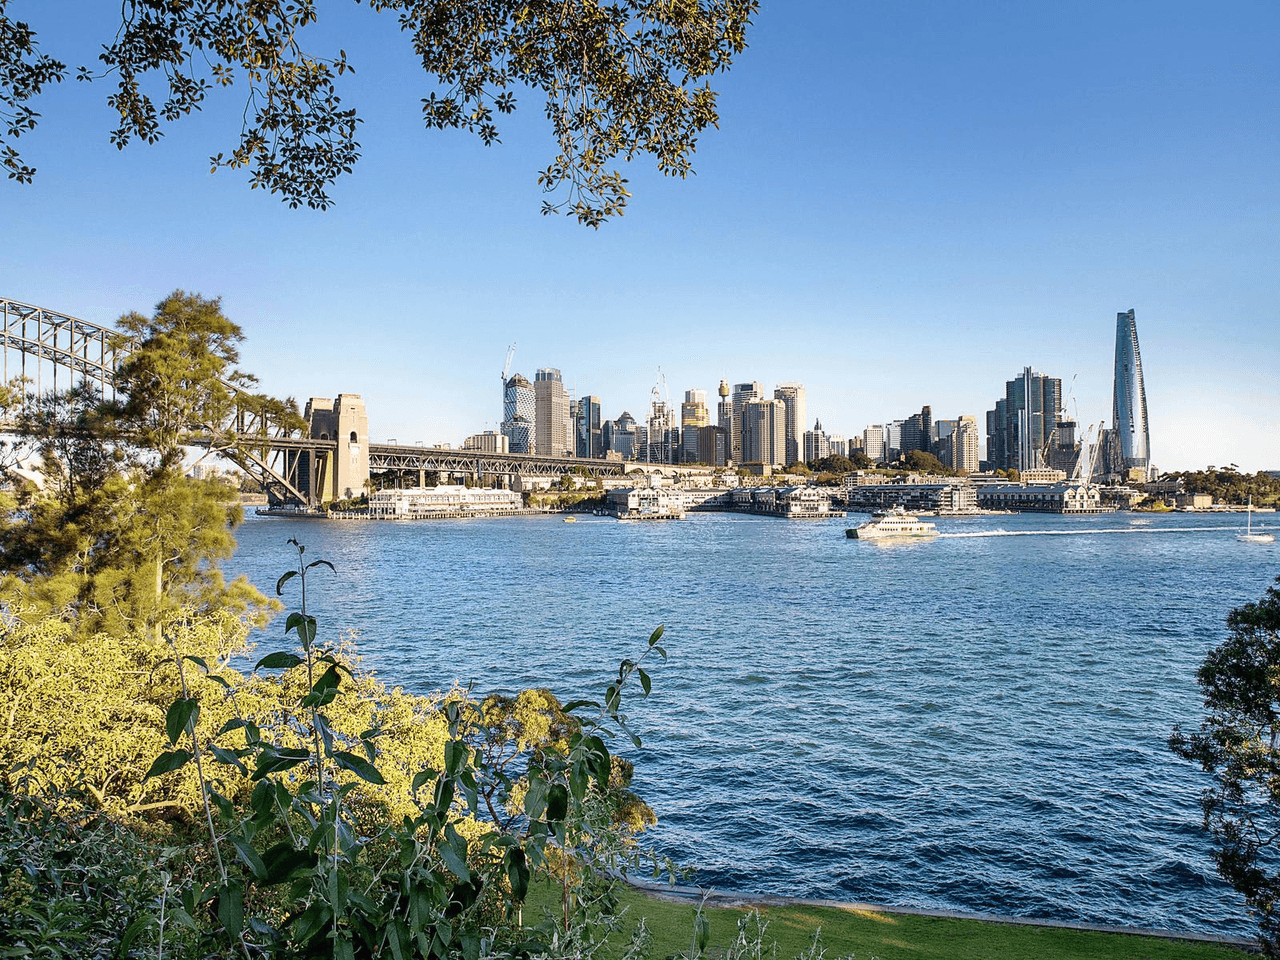 302/3 East Crescent Street, MCMAHONS POINT, NSW 2060